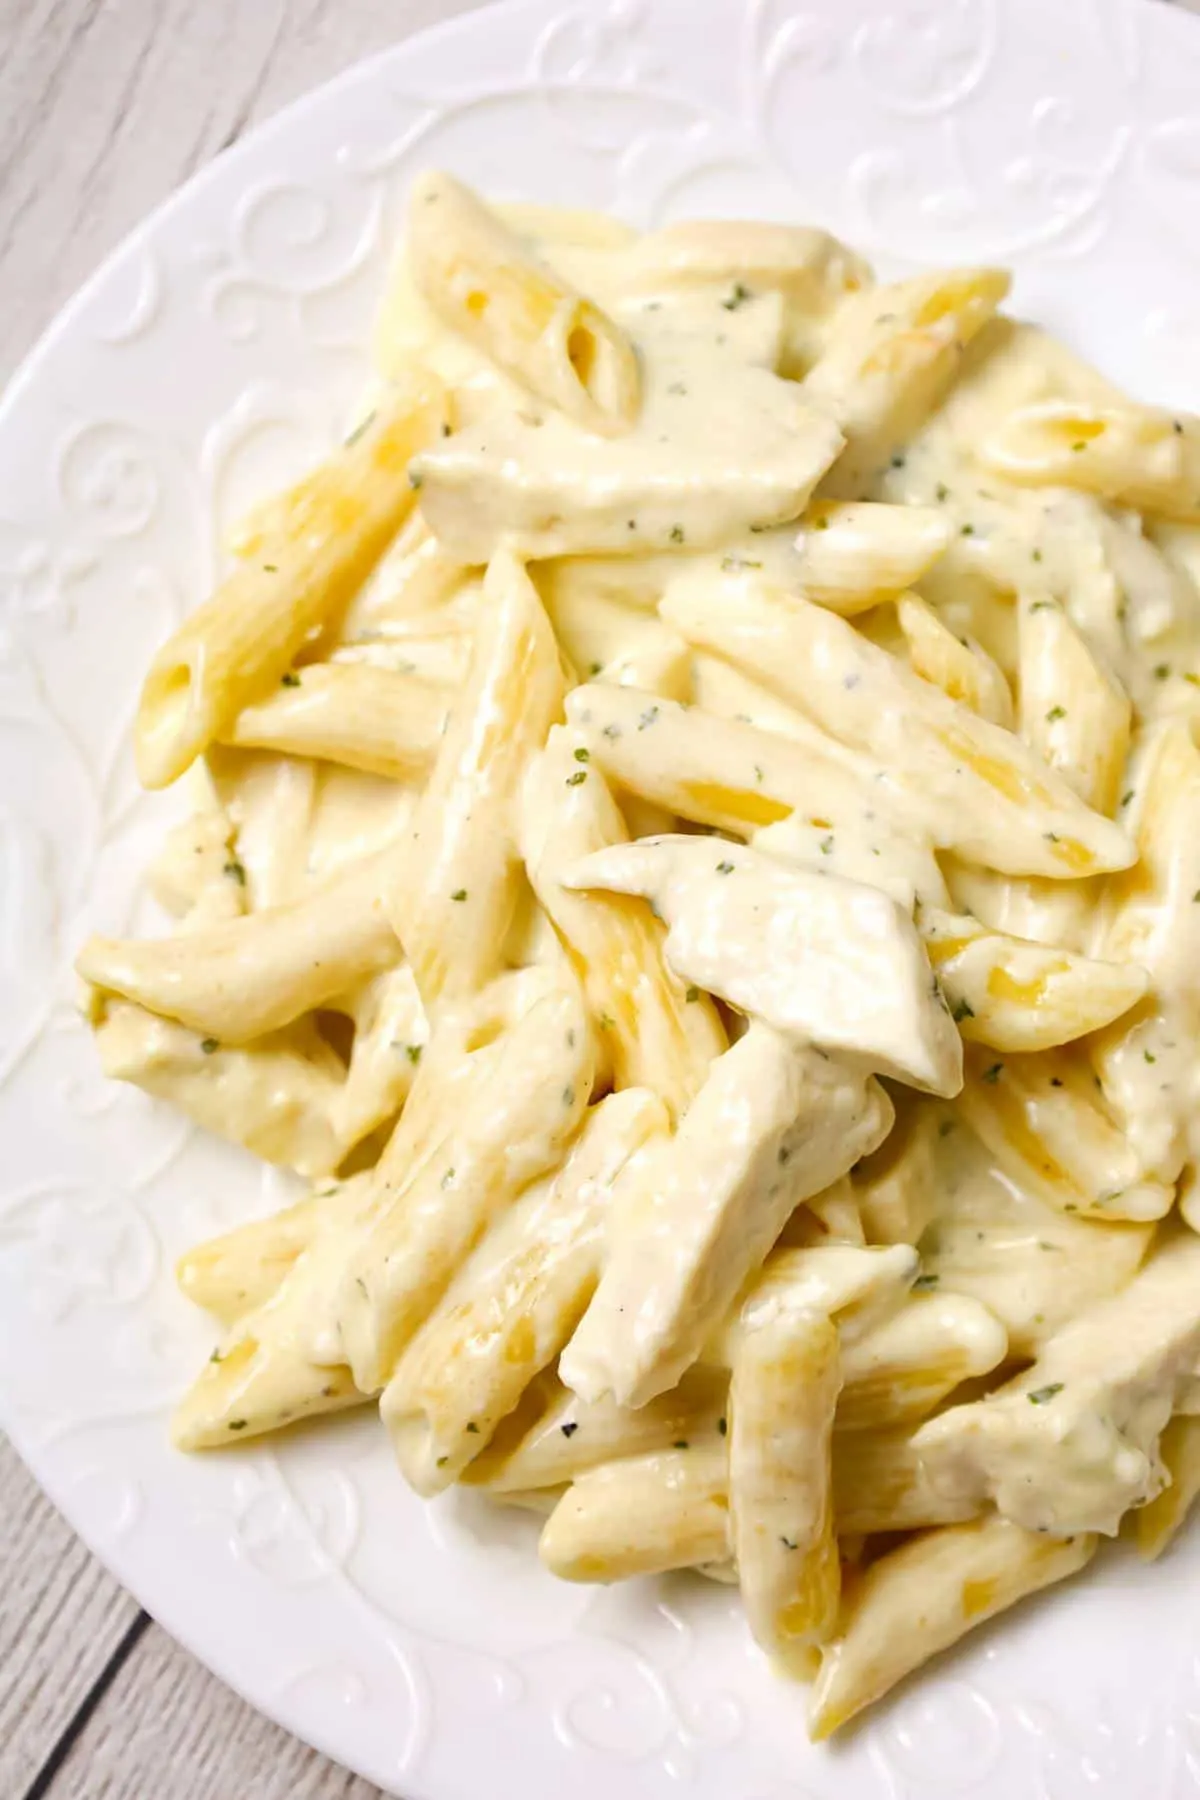 Crock Pot Chicken Alfredo is a delicious slow cooker penne pasta recipe loaded with chunks boneless, skinless chicken breasts and all tossed in a creamy garlic and parmesan sauce.